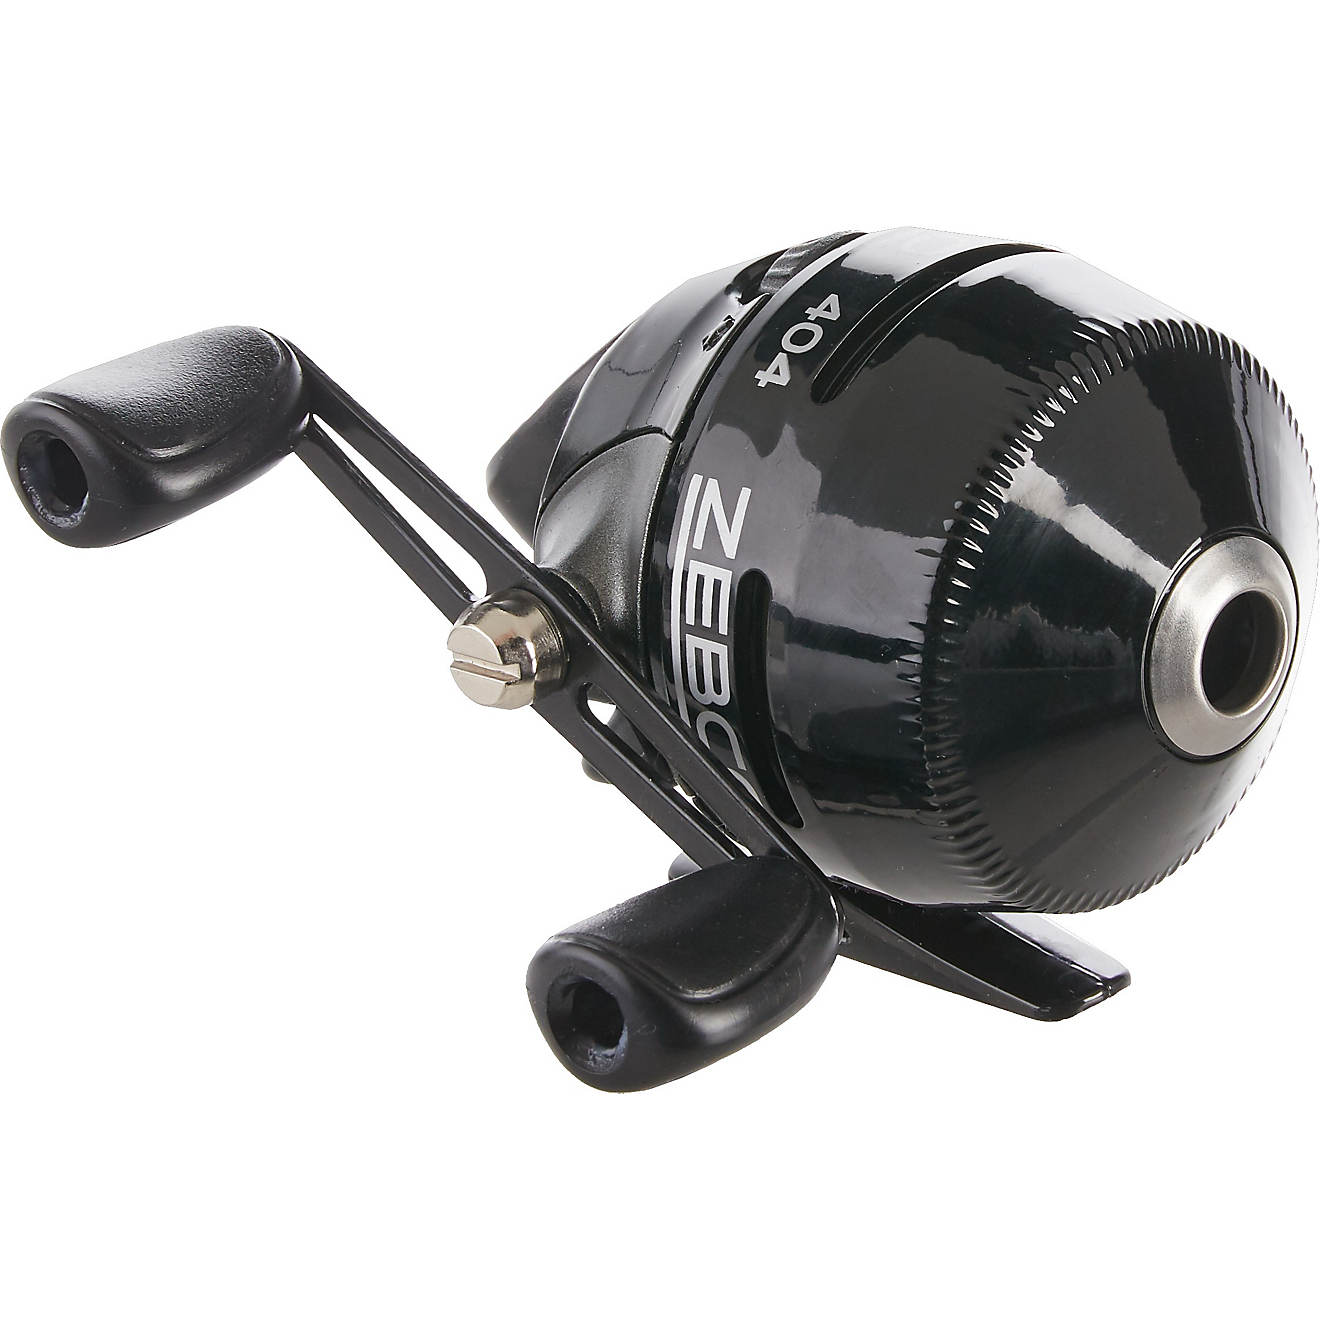 TWO NEW RED ZEBCO 404 SPINCAST FISHING REEL Gear Ratio 2.8:1  15 POUND LINE 